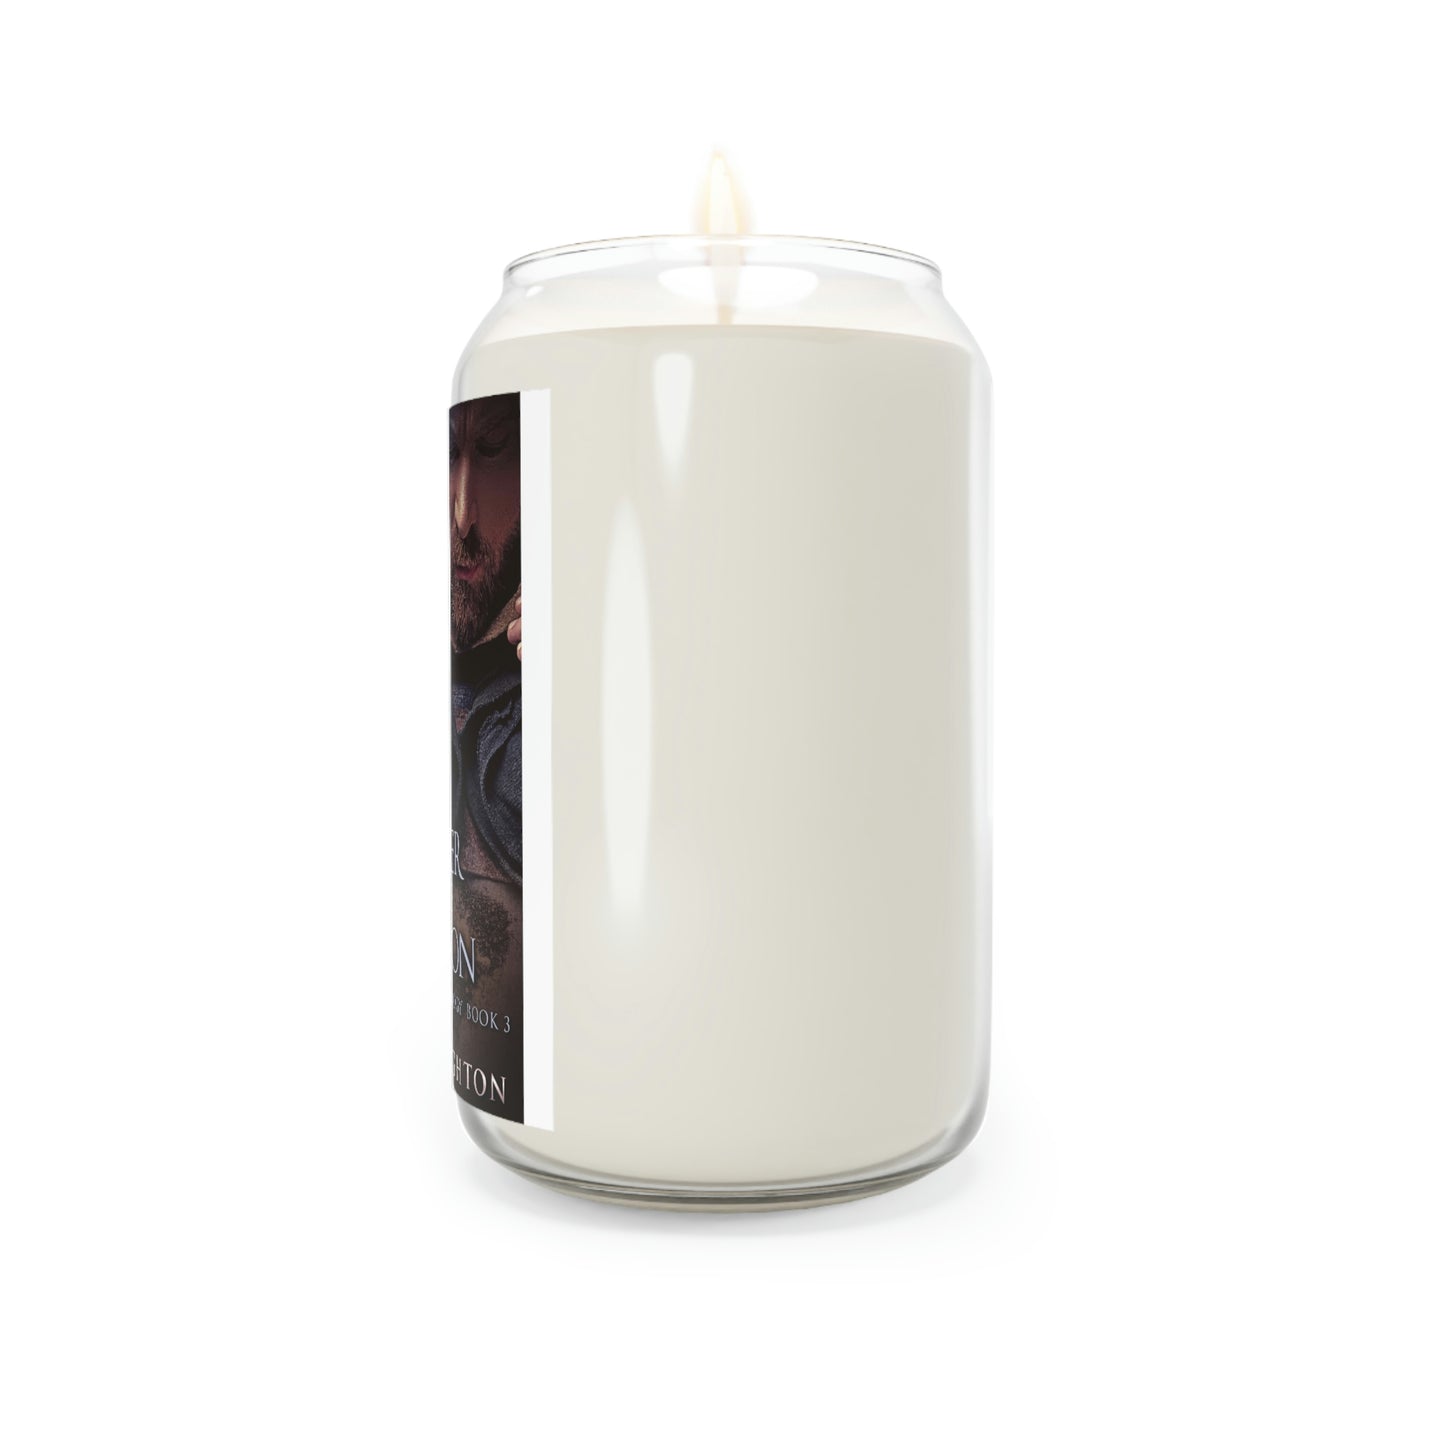 The Master Of The Chevron - Scented Candle